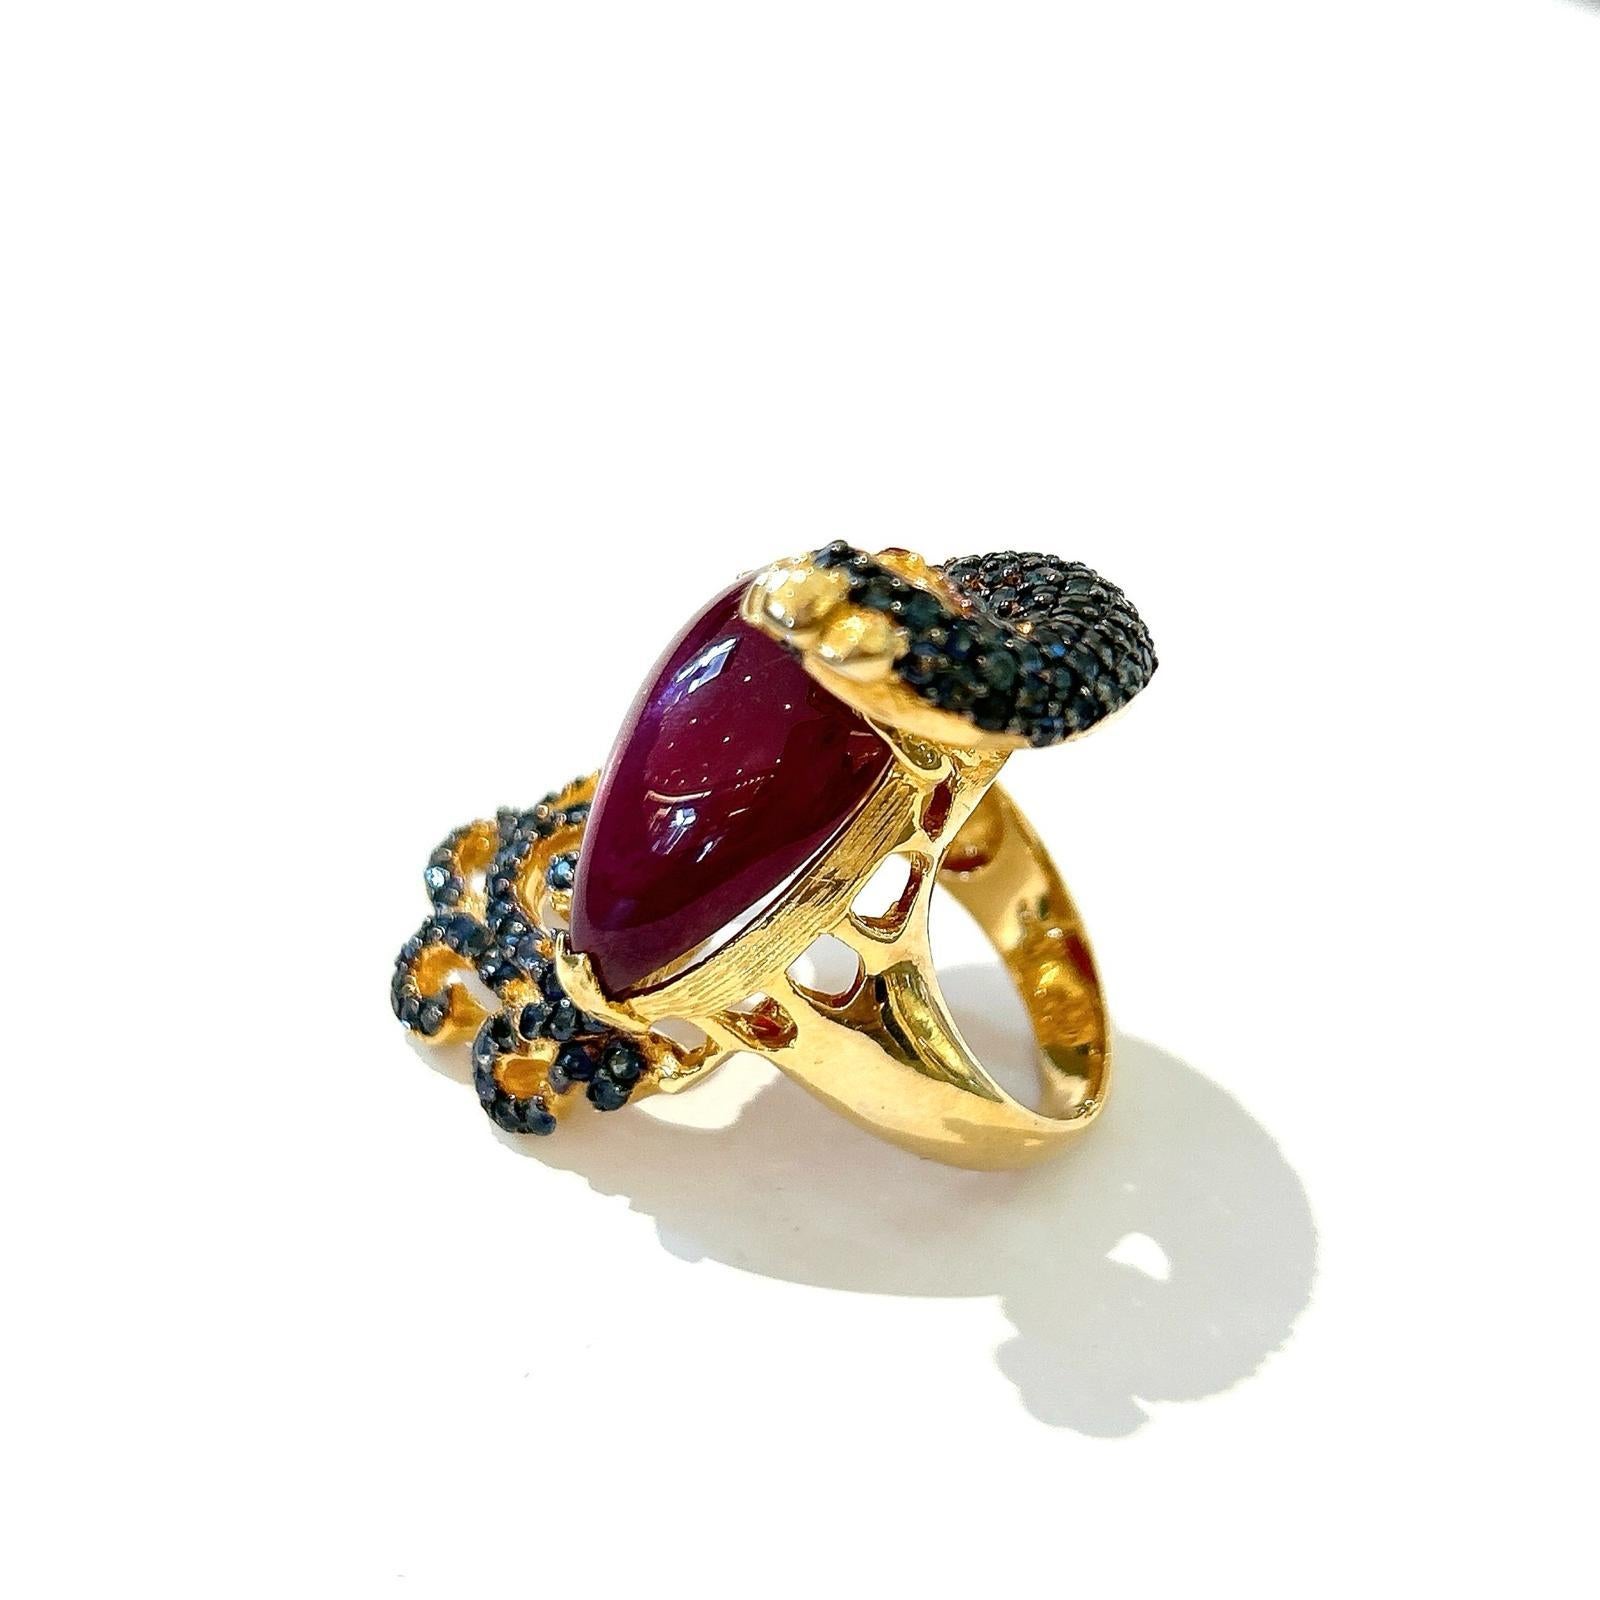 Bochic “Orient” Ruby & Sapphire Swan Cocktail Ring Set 18K & Silver  For Sale 3